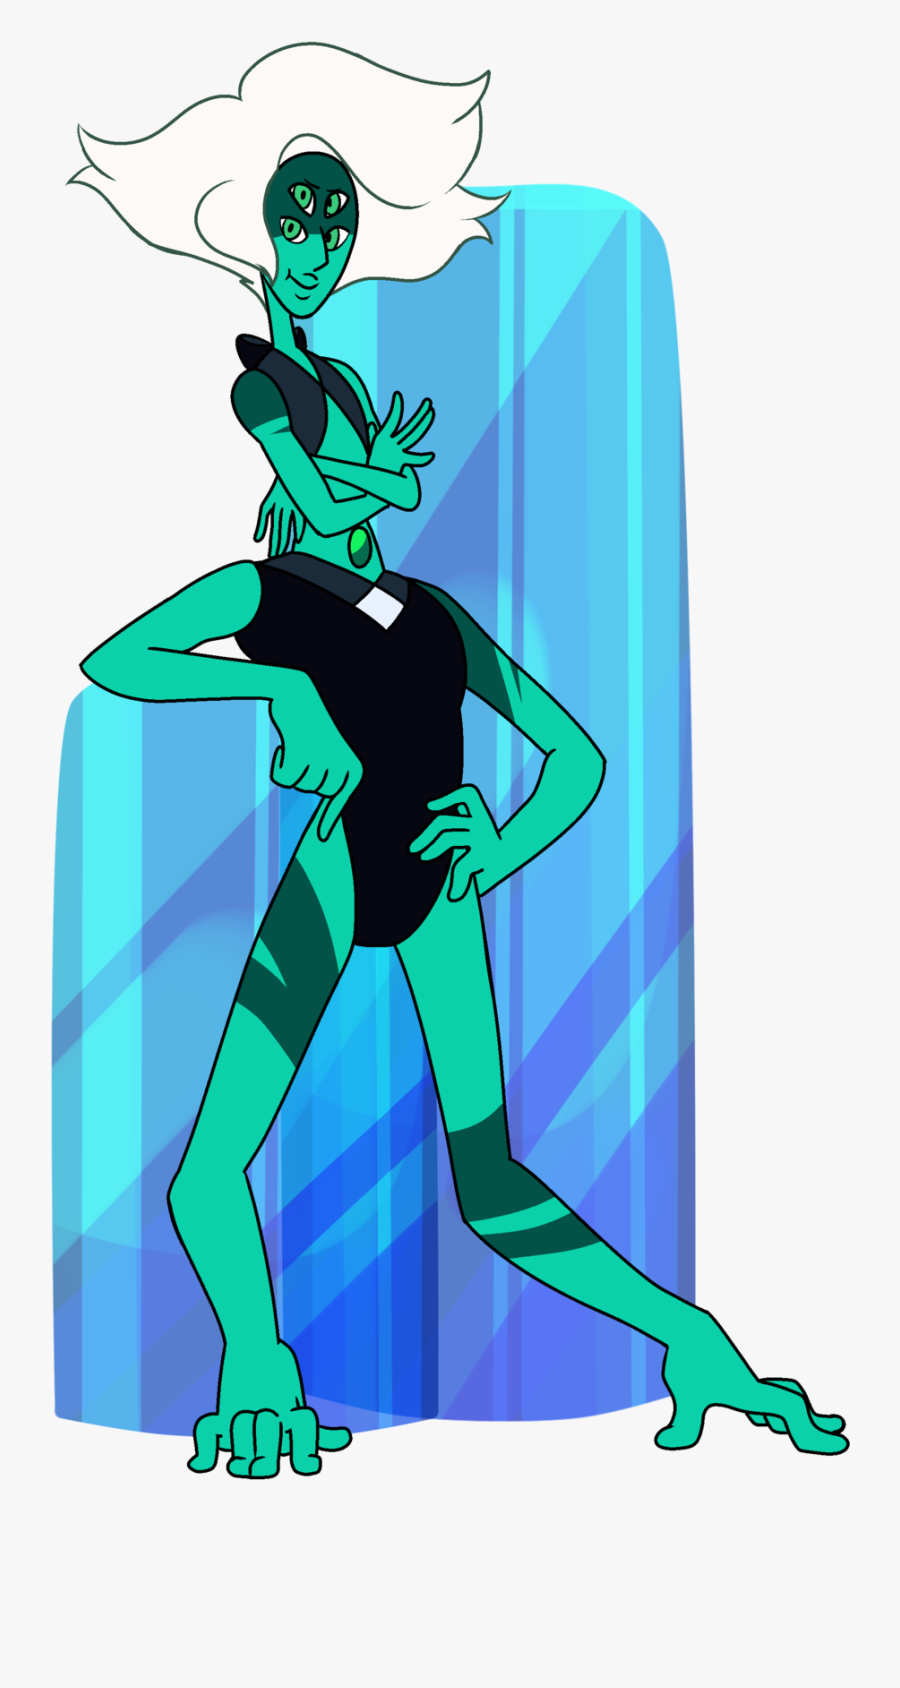 Skinny Malachite
i Guess She Would Be More Stable - Steven Universe Skinny Malachite, Transparent Clipart